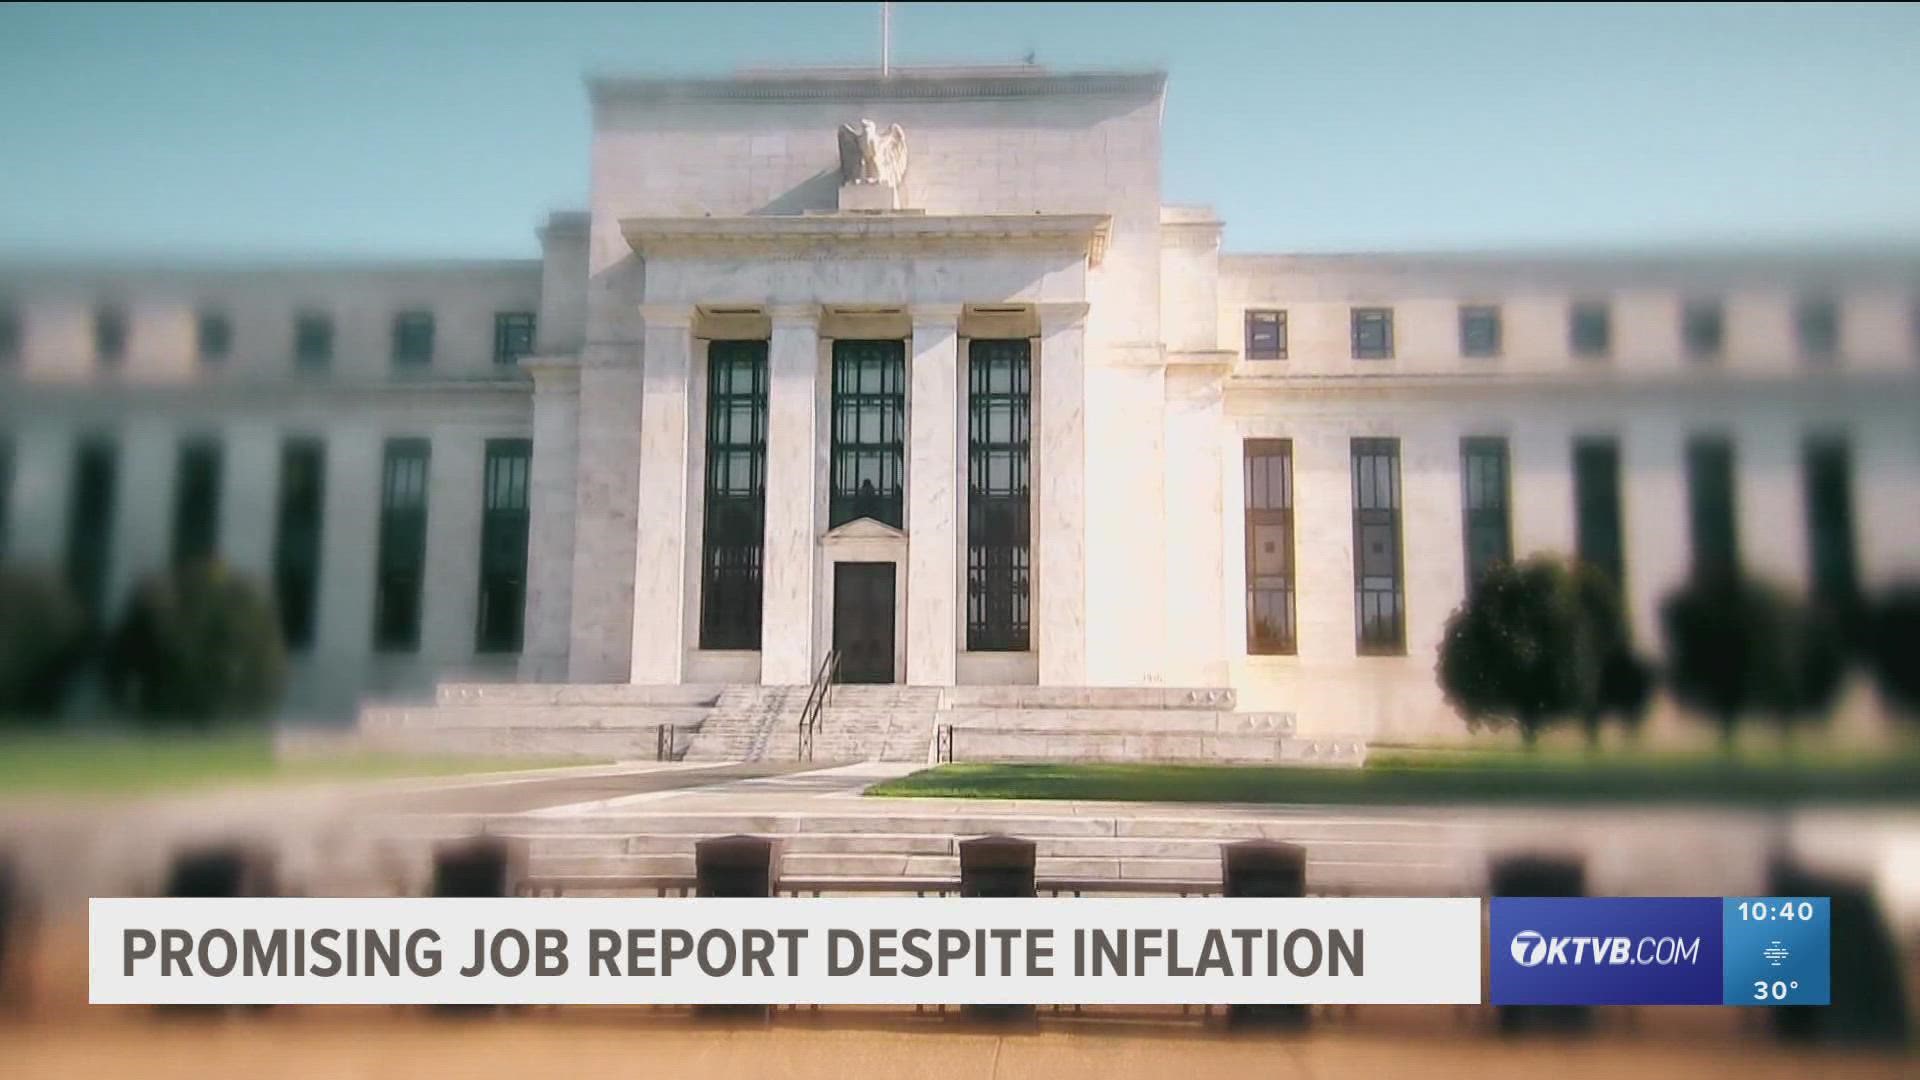 Despite inflation employment remains low. Fed is likely to keep leaning hard into interest rate hikes.